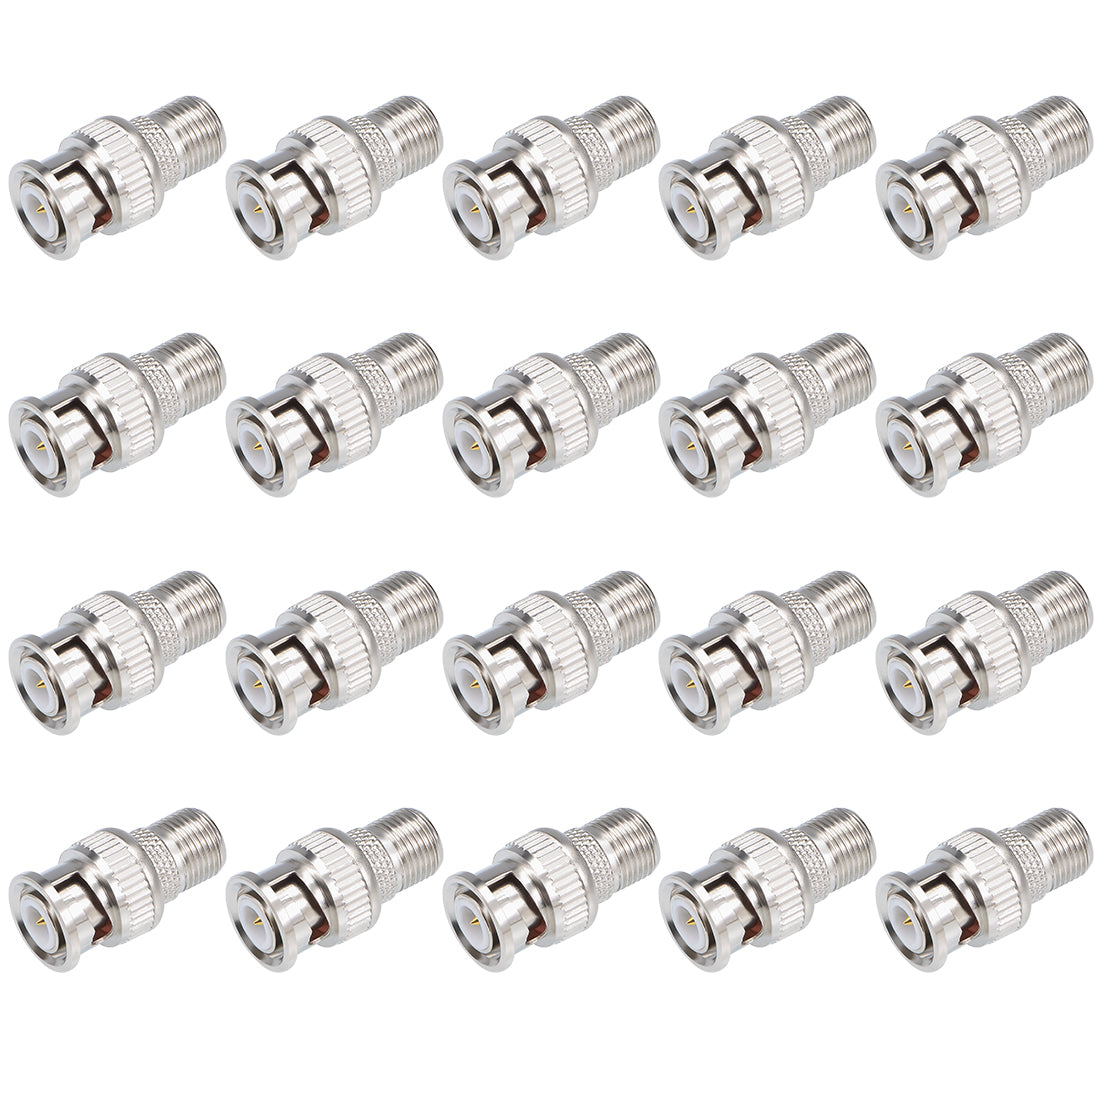 uxcell Uxcell 20pcs Alloy BNC Male to BSP F Female Jack RF Coaxial Adapter Connector Video